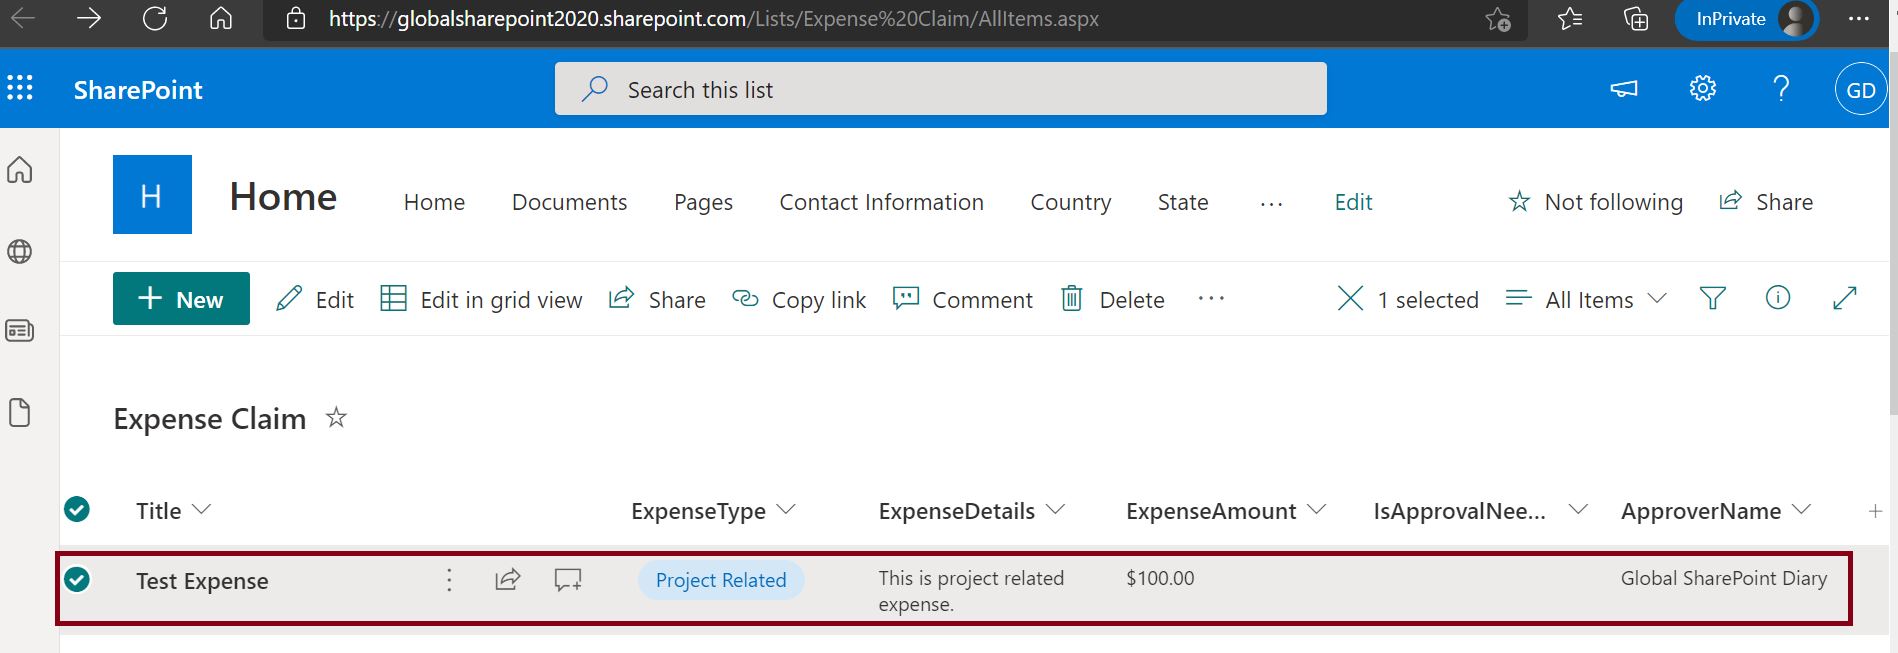 Conditionally show or hide columns in a SharePoint list, Show Hide Columns conditionally demo with the sample SharePoint list